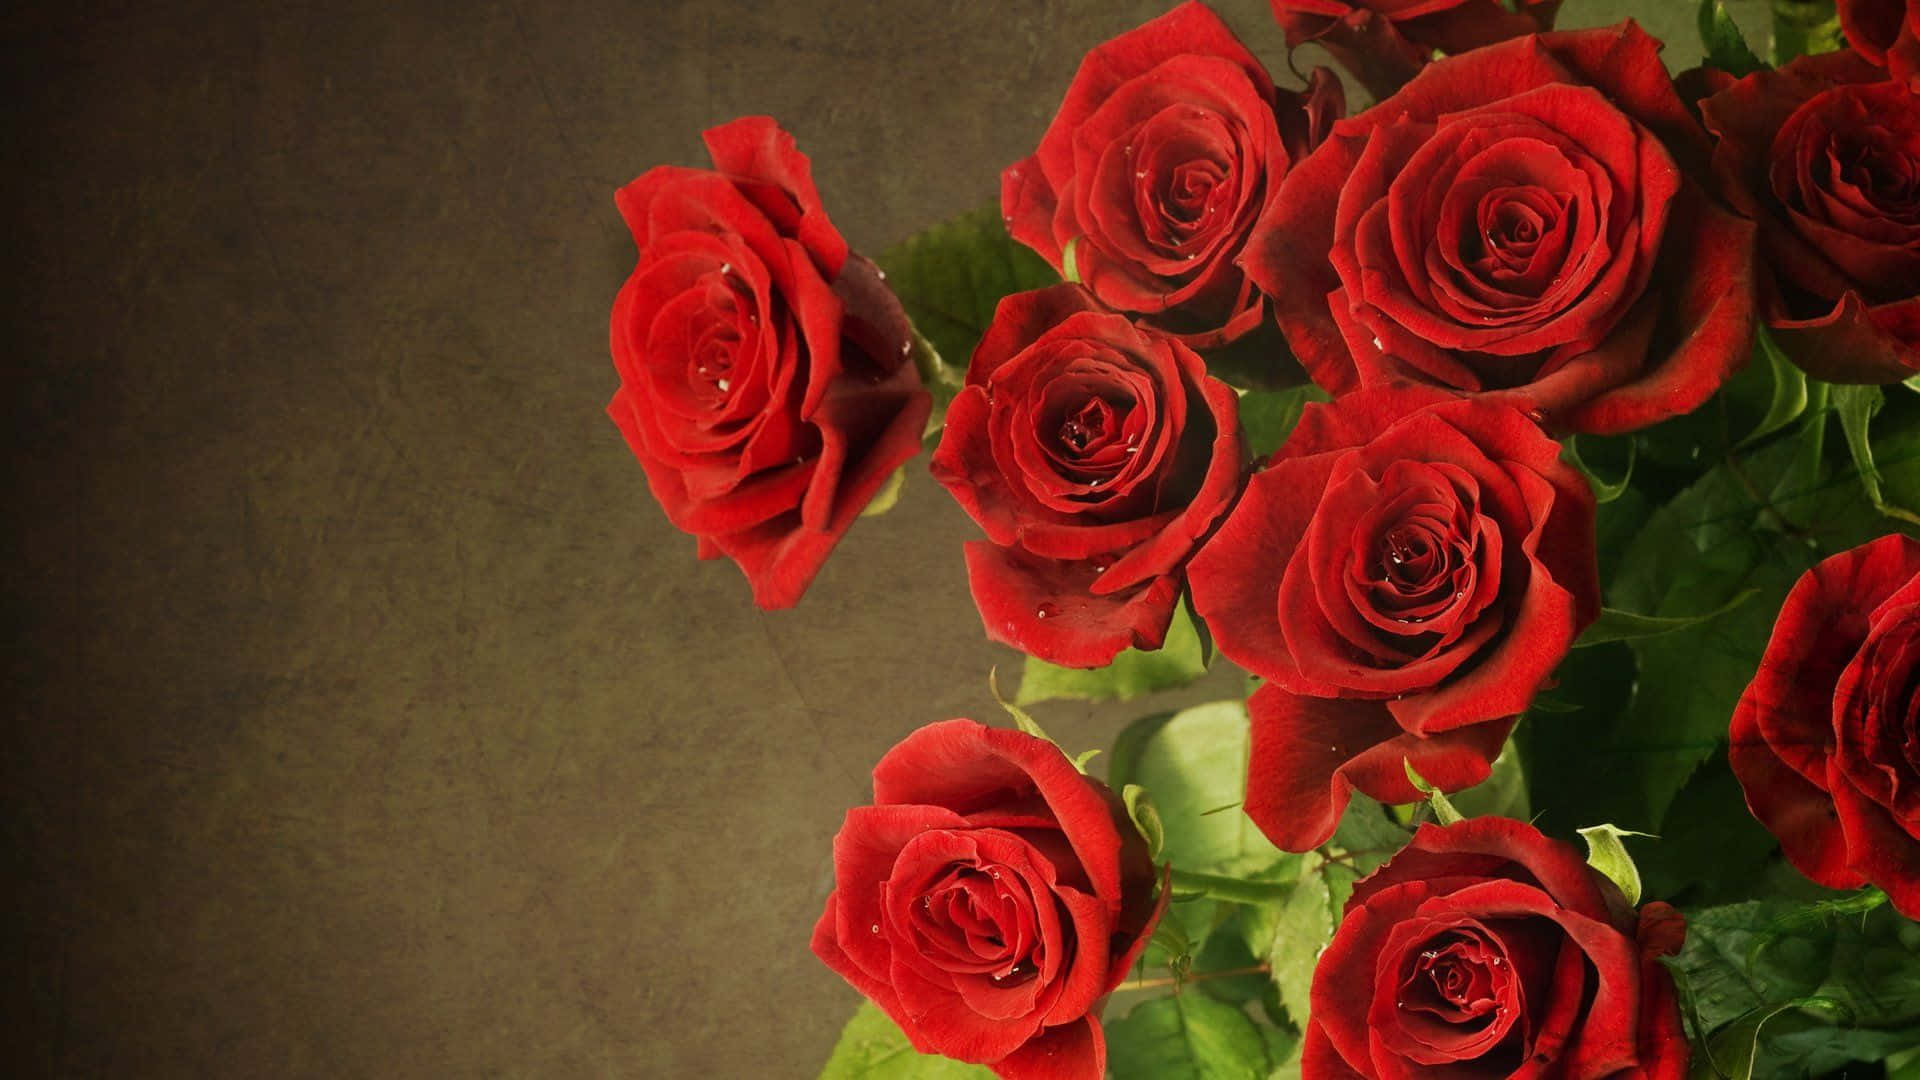 Stunning display of vibrant roses forming the perfect background